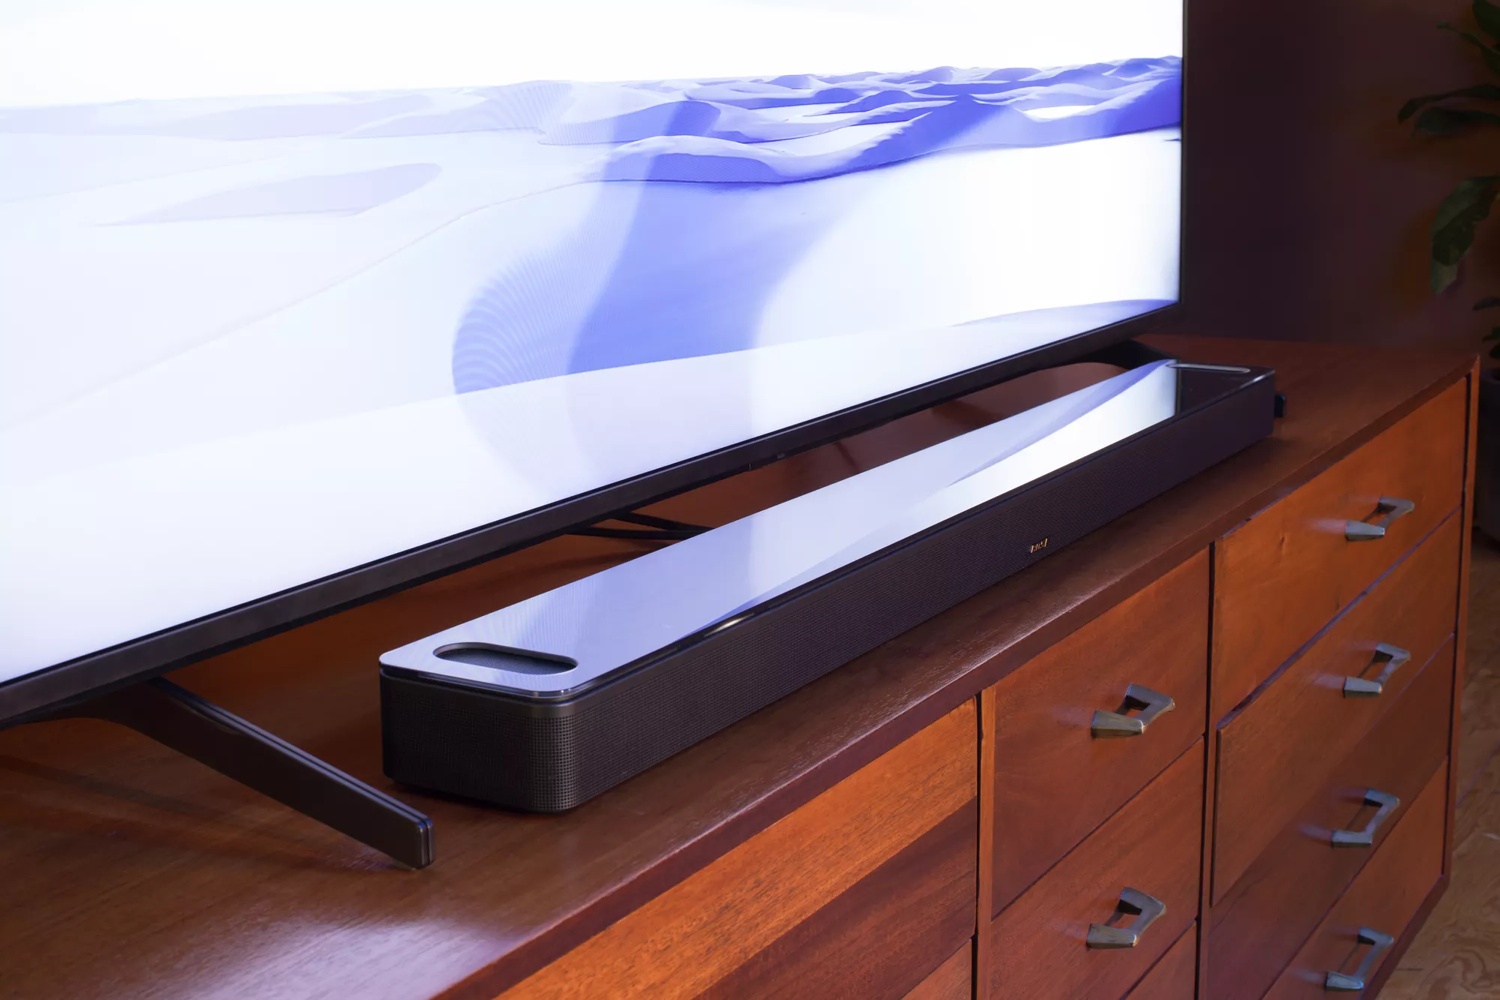 Bose Smart Soundbar 900 sitting on console in front of TV